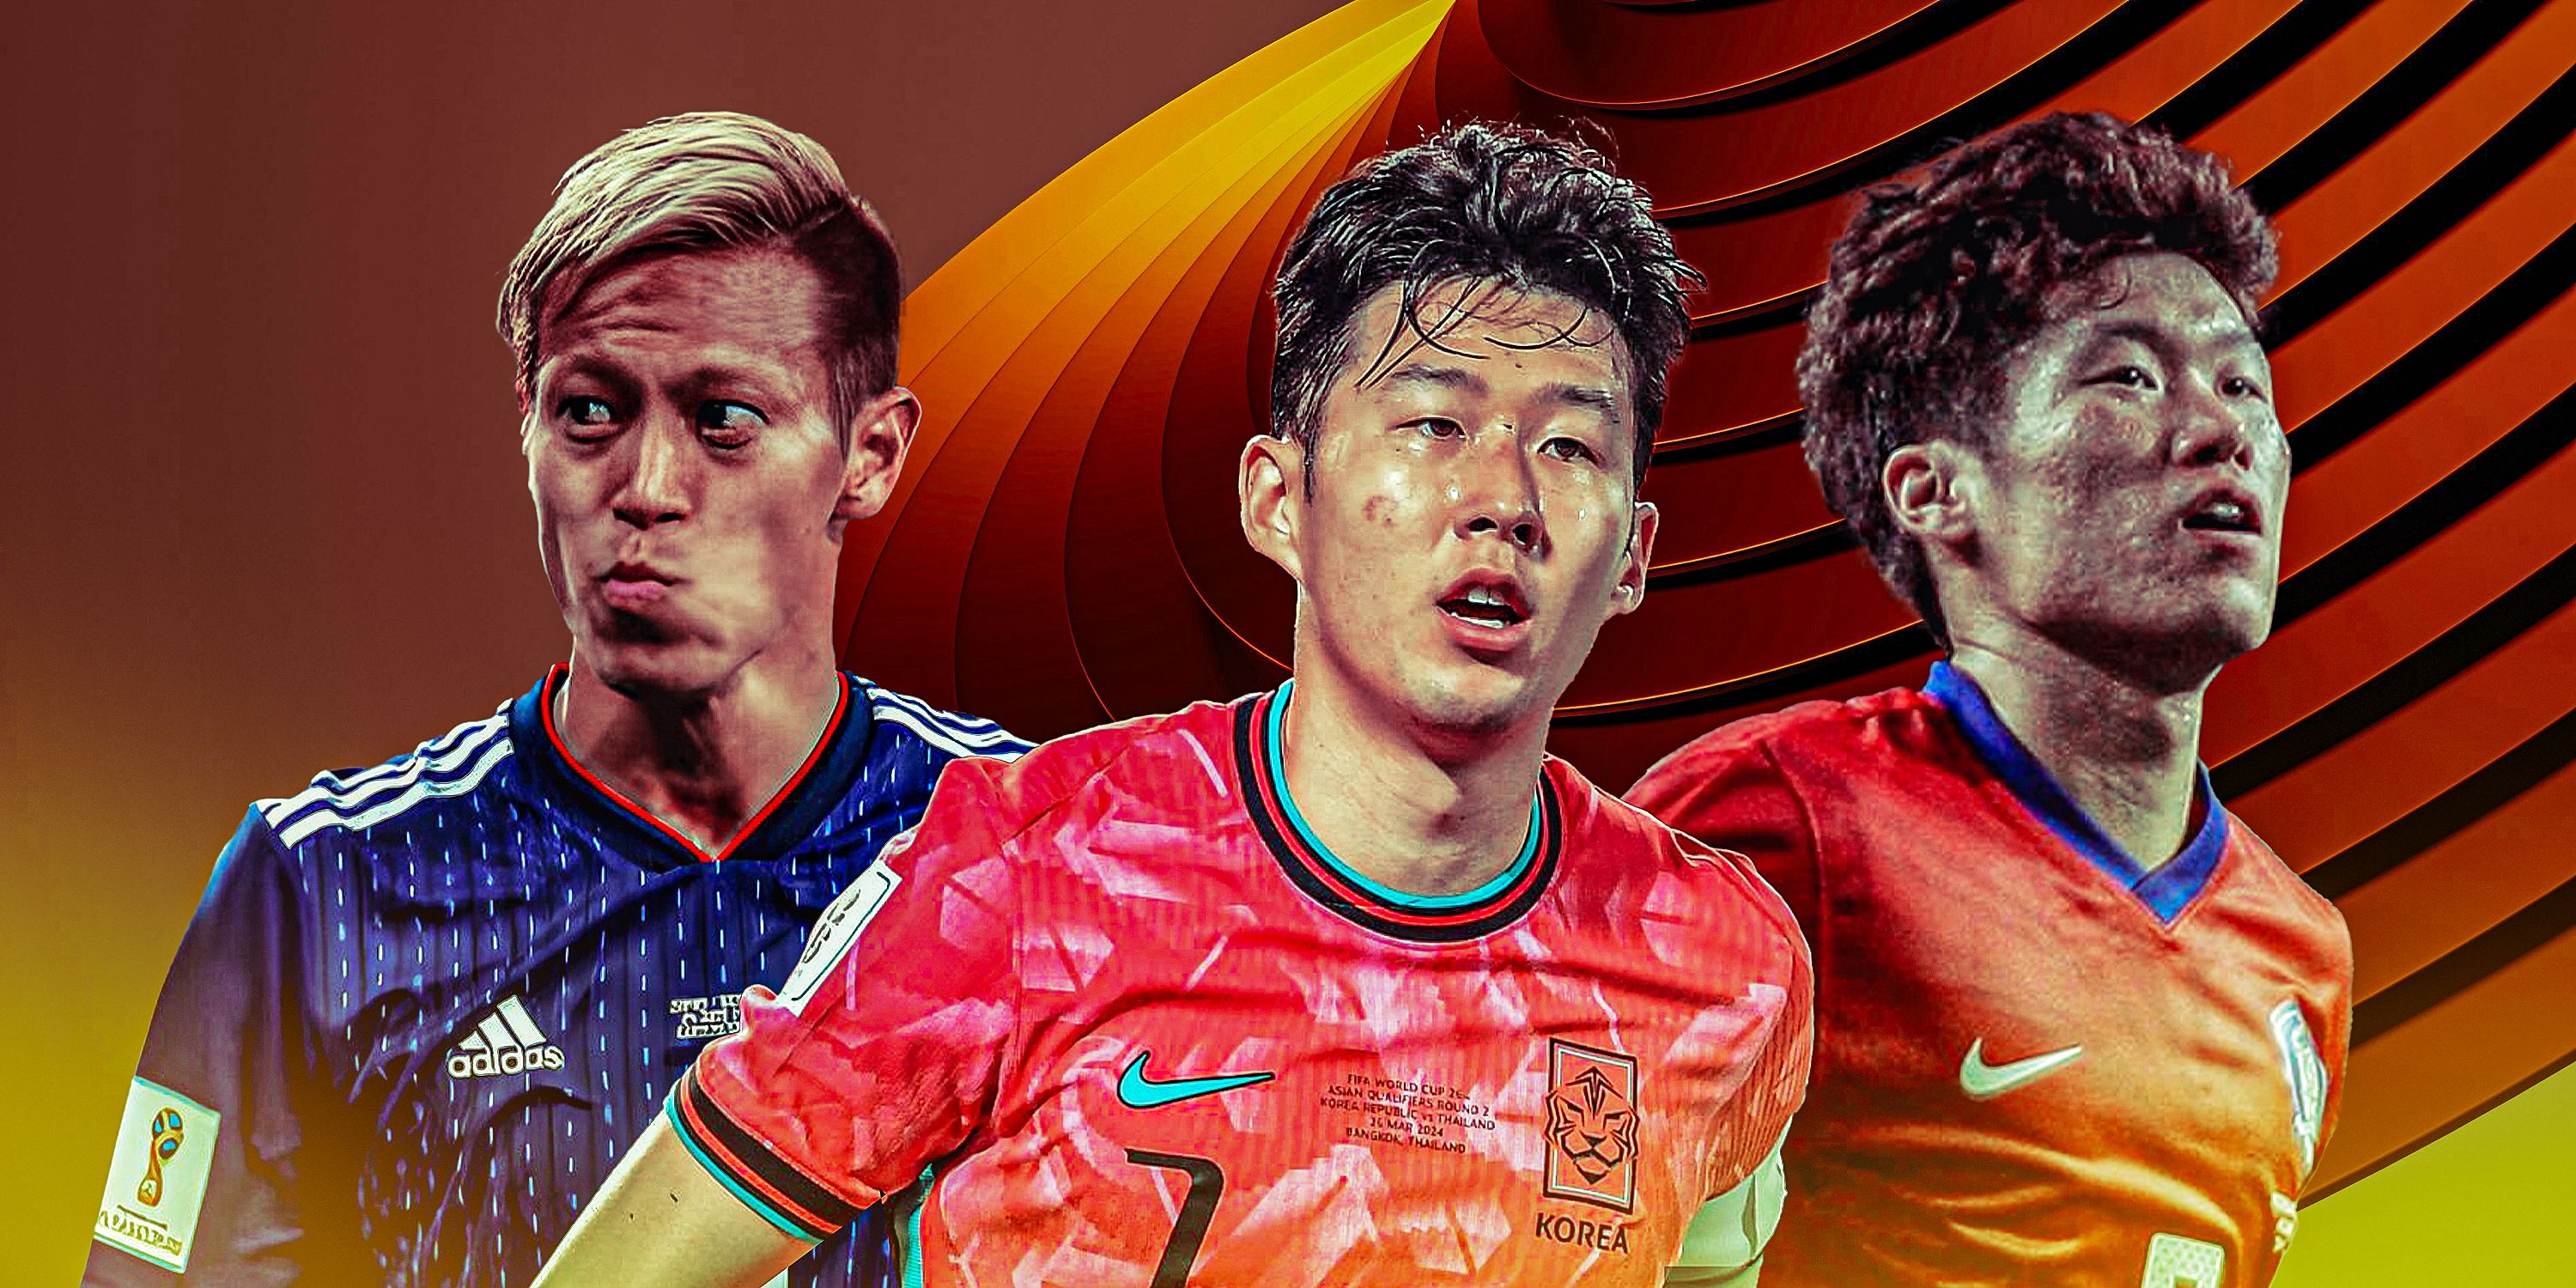 Son Heung-min (South Korea kit) in the middle with Keisuke Honda (Japan) and Park Ji-sung (South Korea) on either side